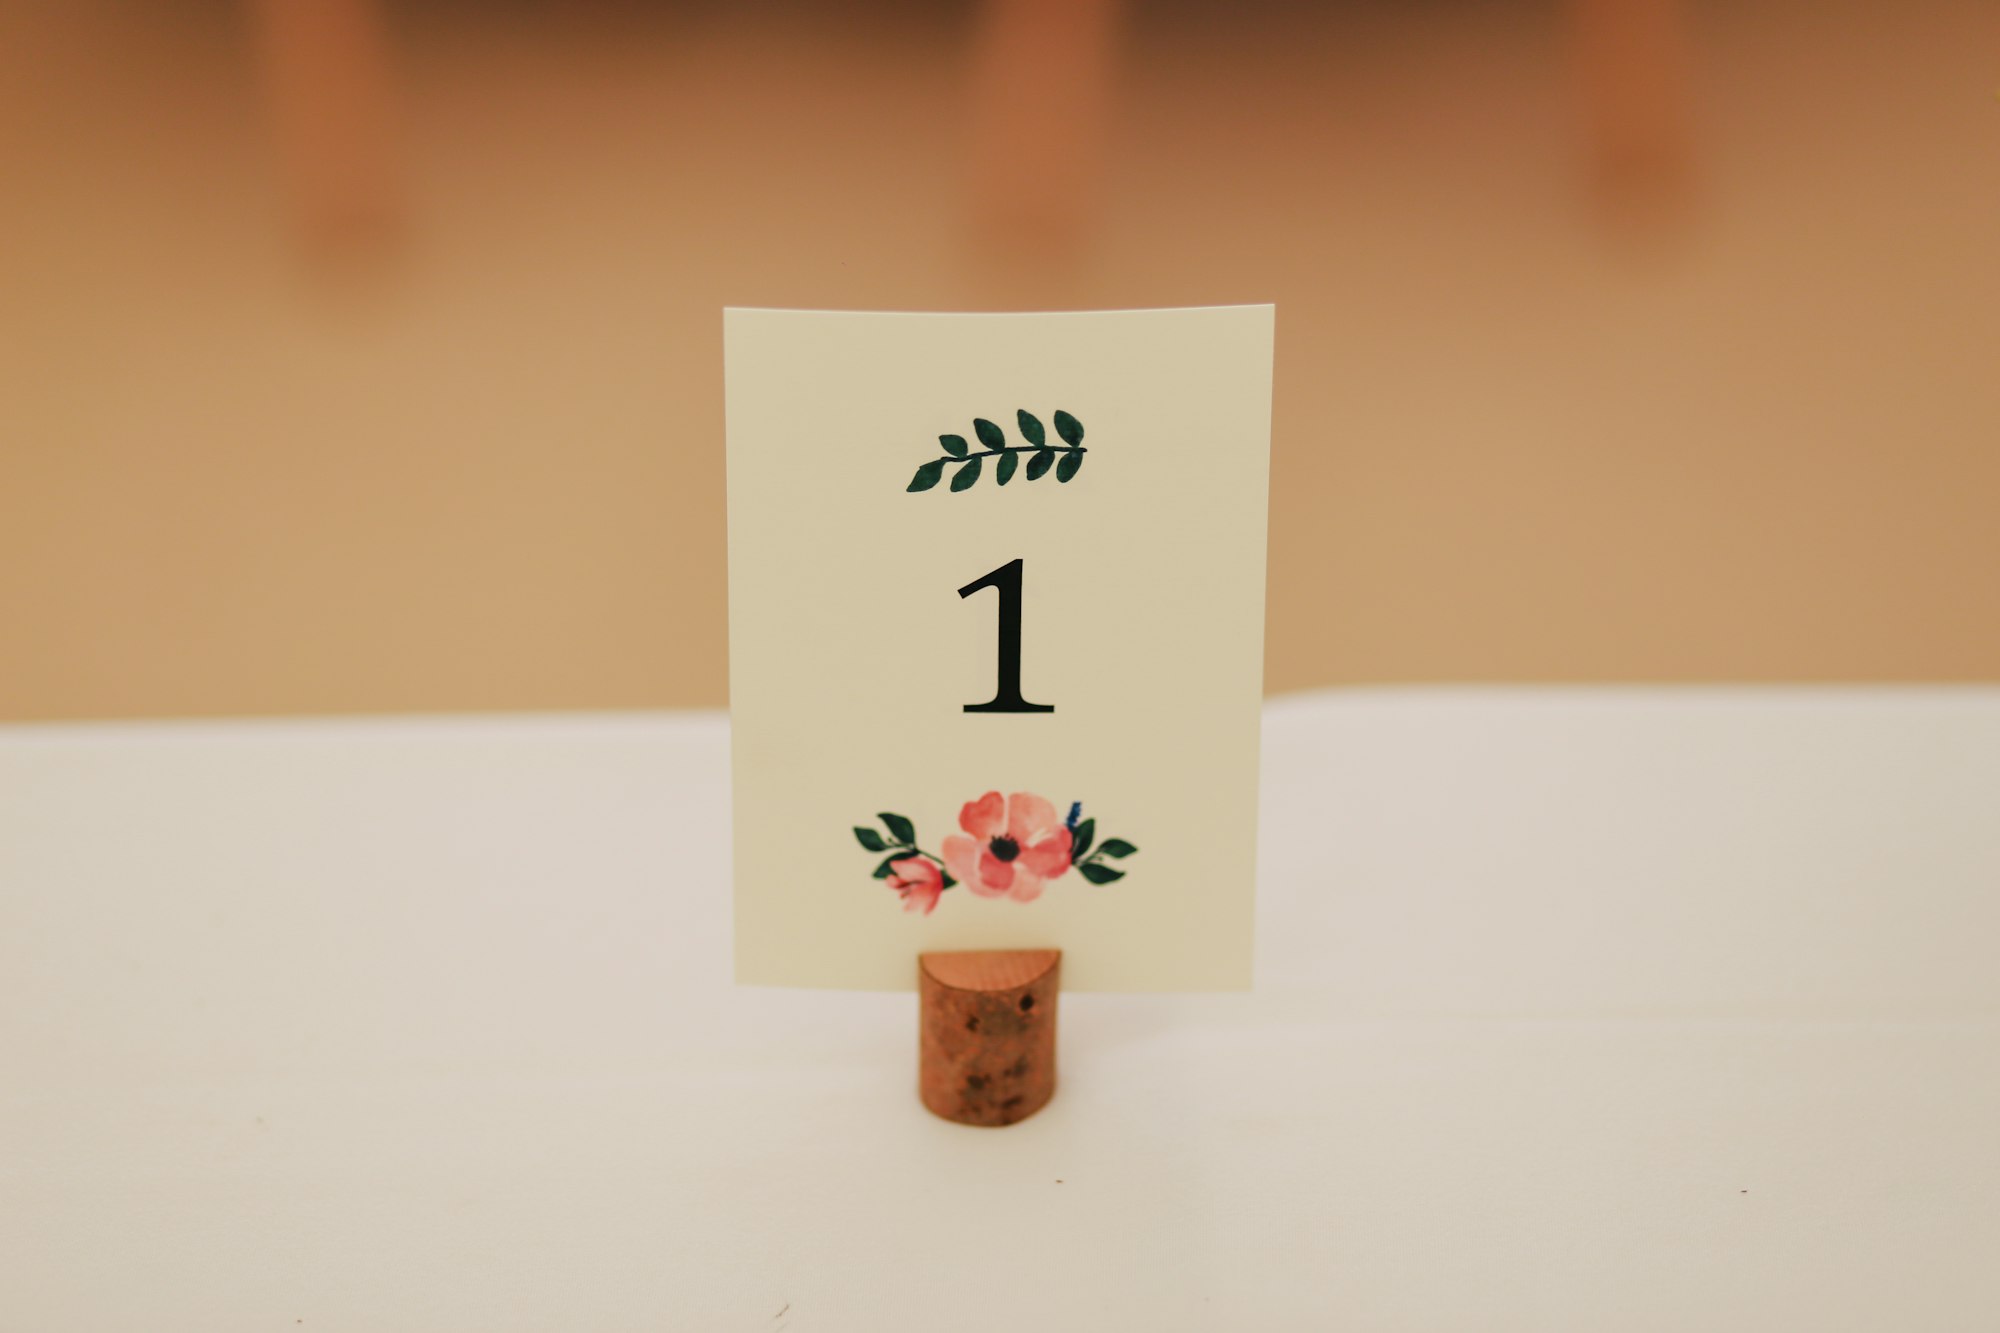 A wedding table number placard, showing the number 1.